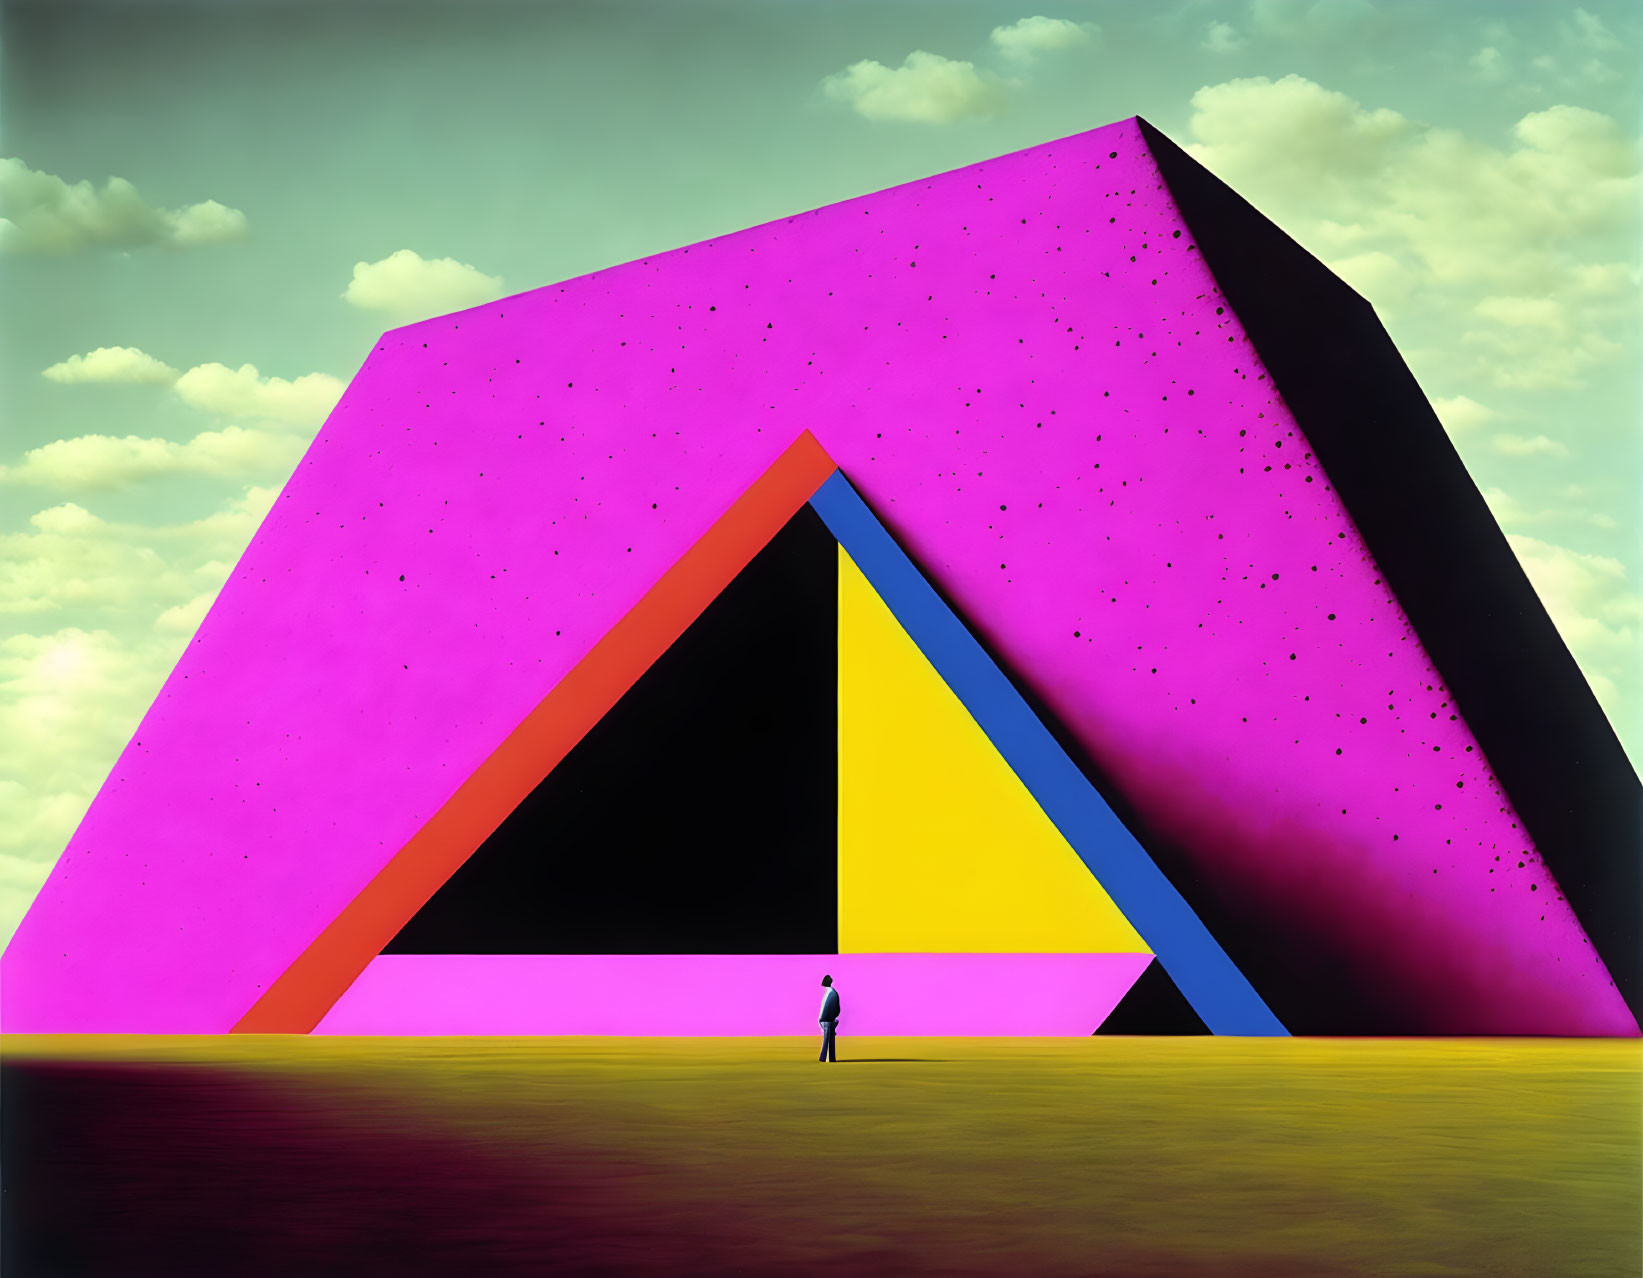 Surreal pink pyramid with black and yellow entrance under cloudy sky